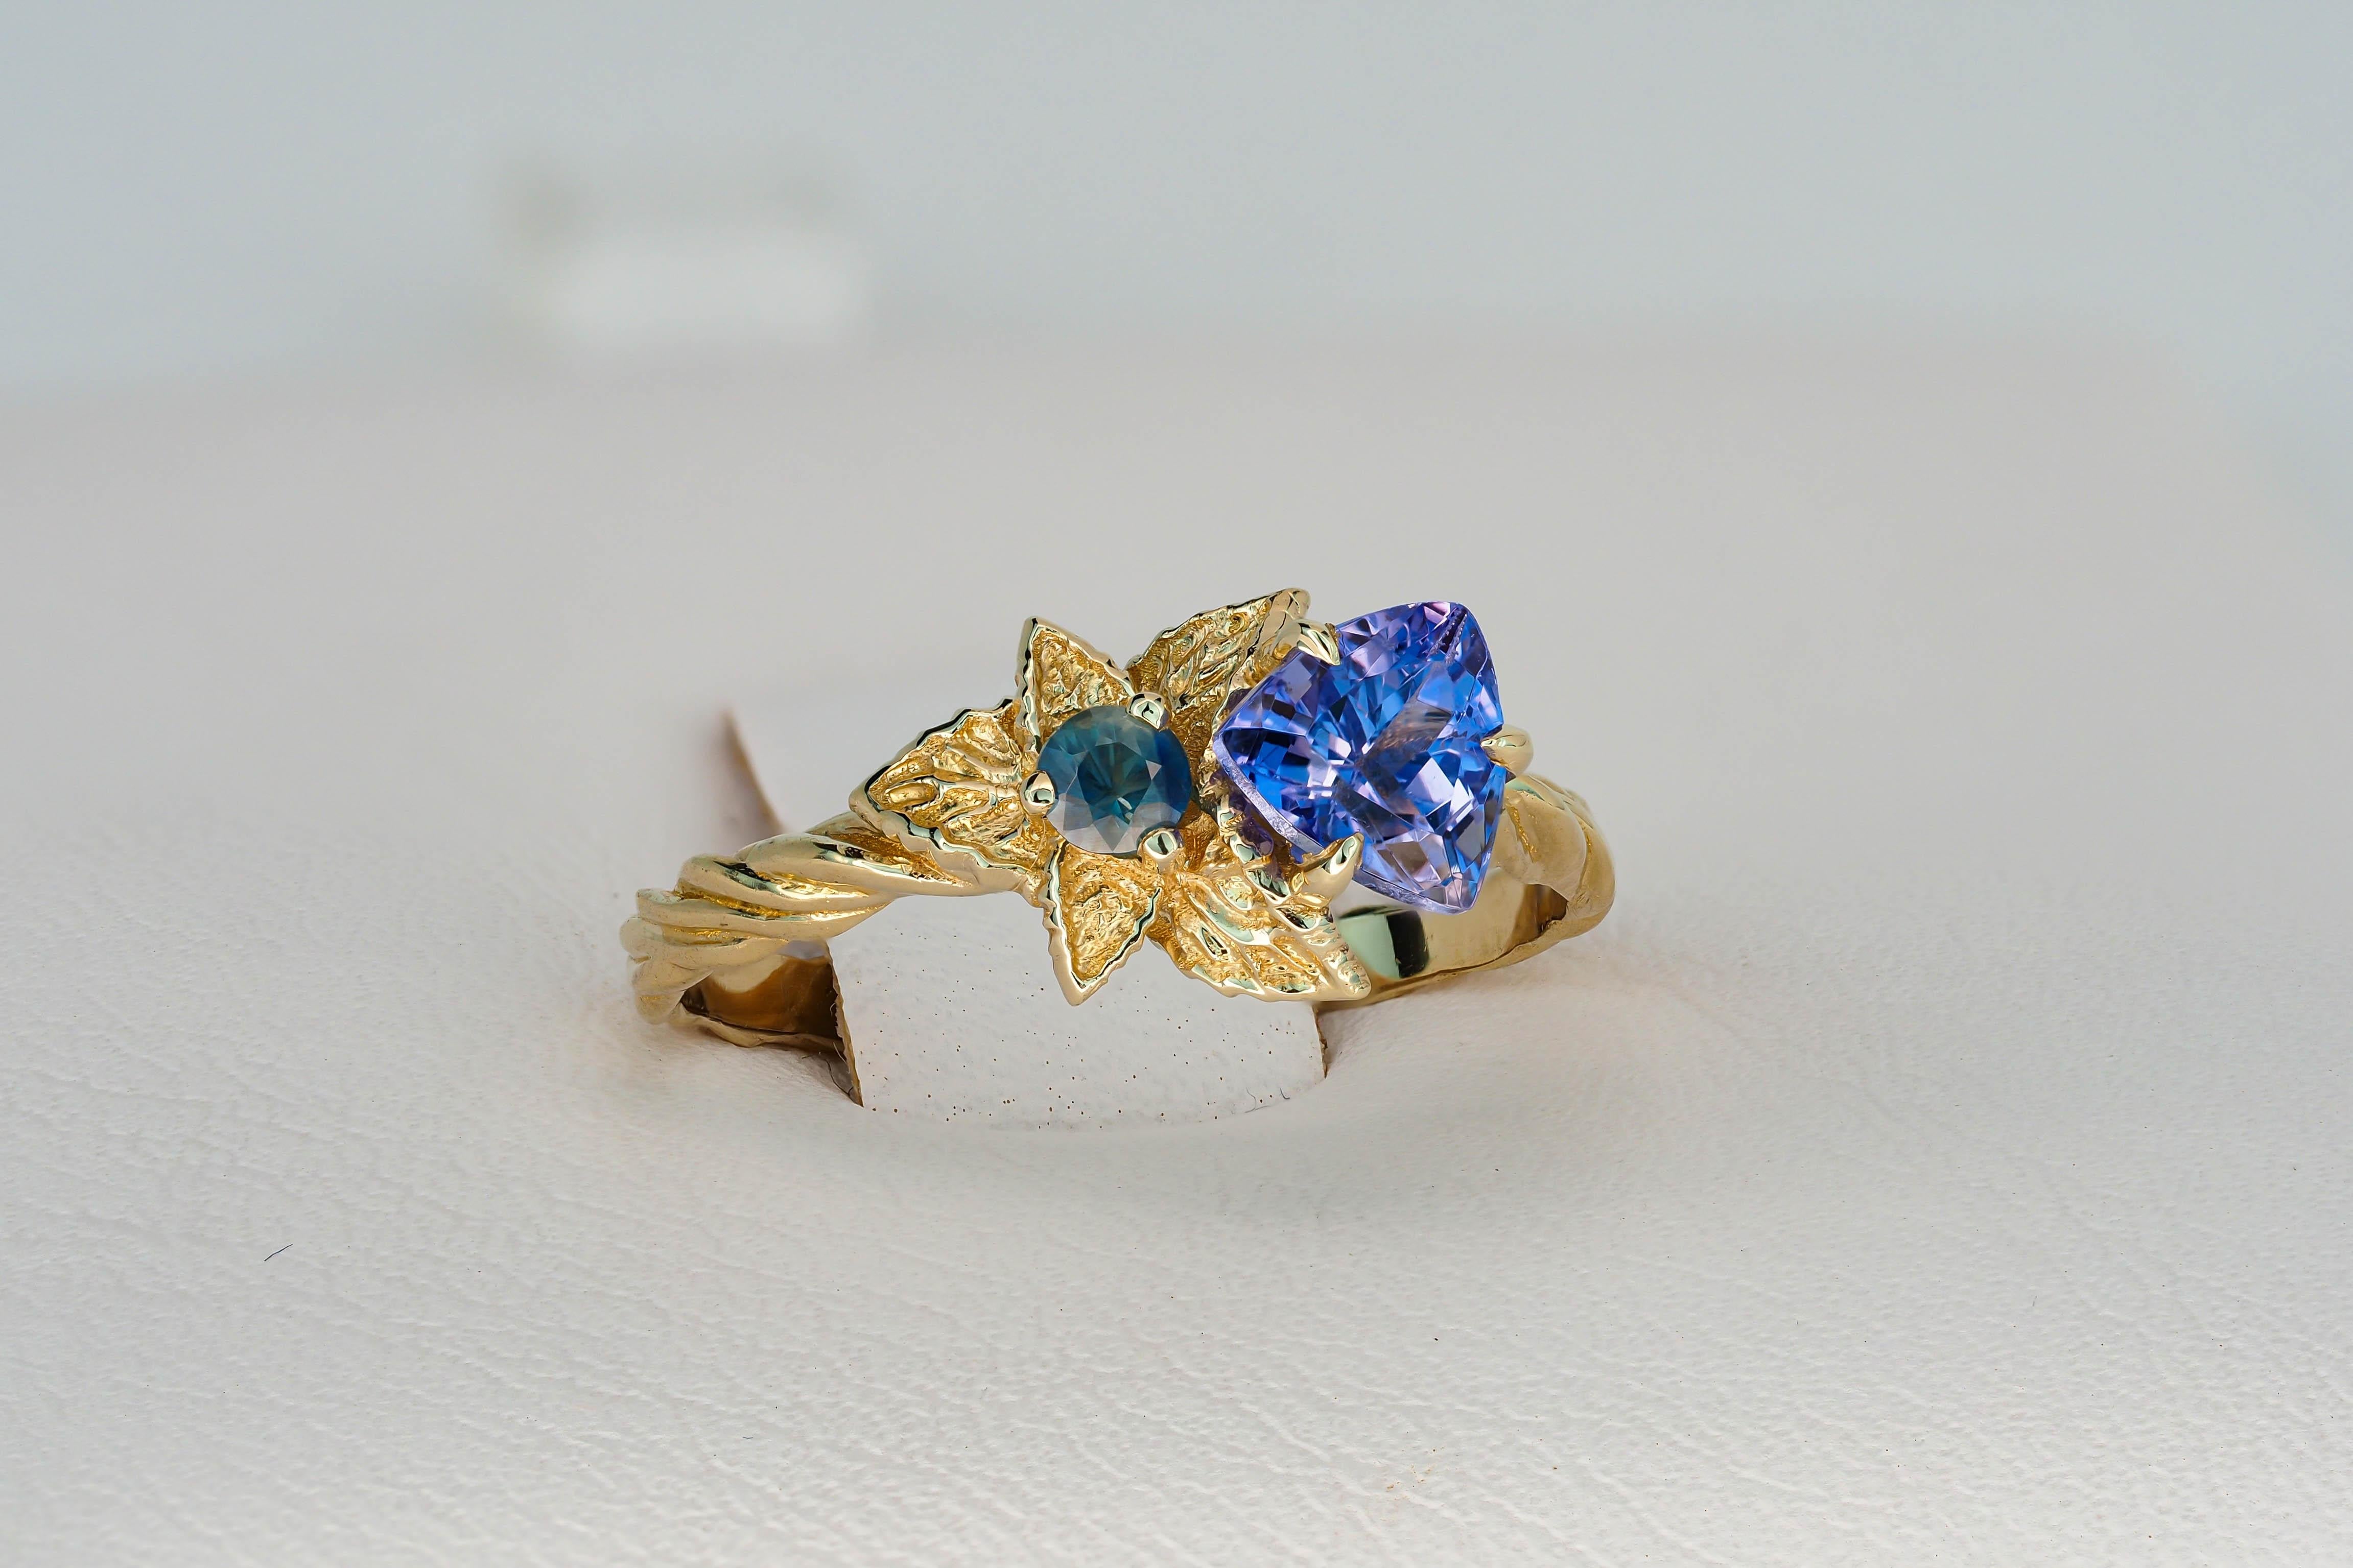 For Sale:  Tanzanite and diamonds 14k gold ring. Flower design ring with tanzanite. 10